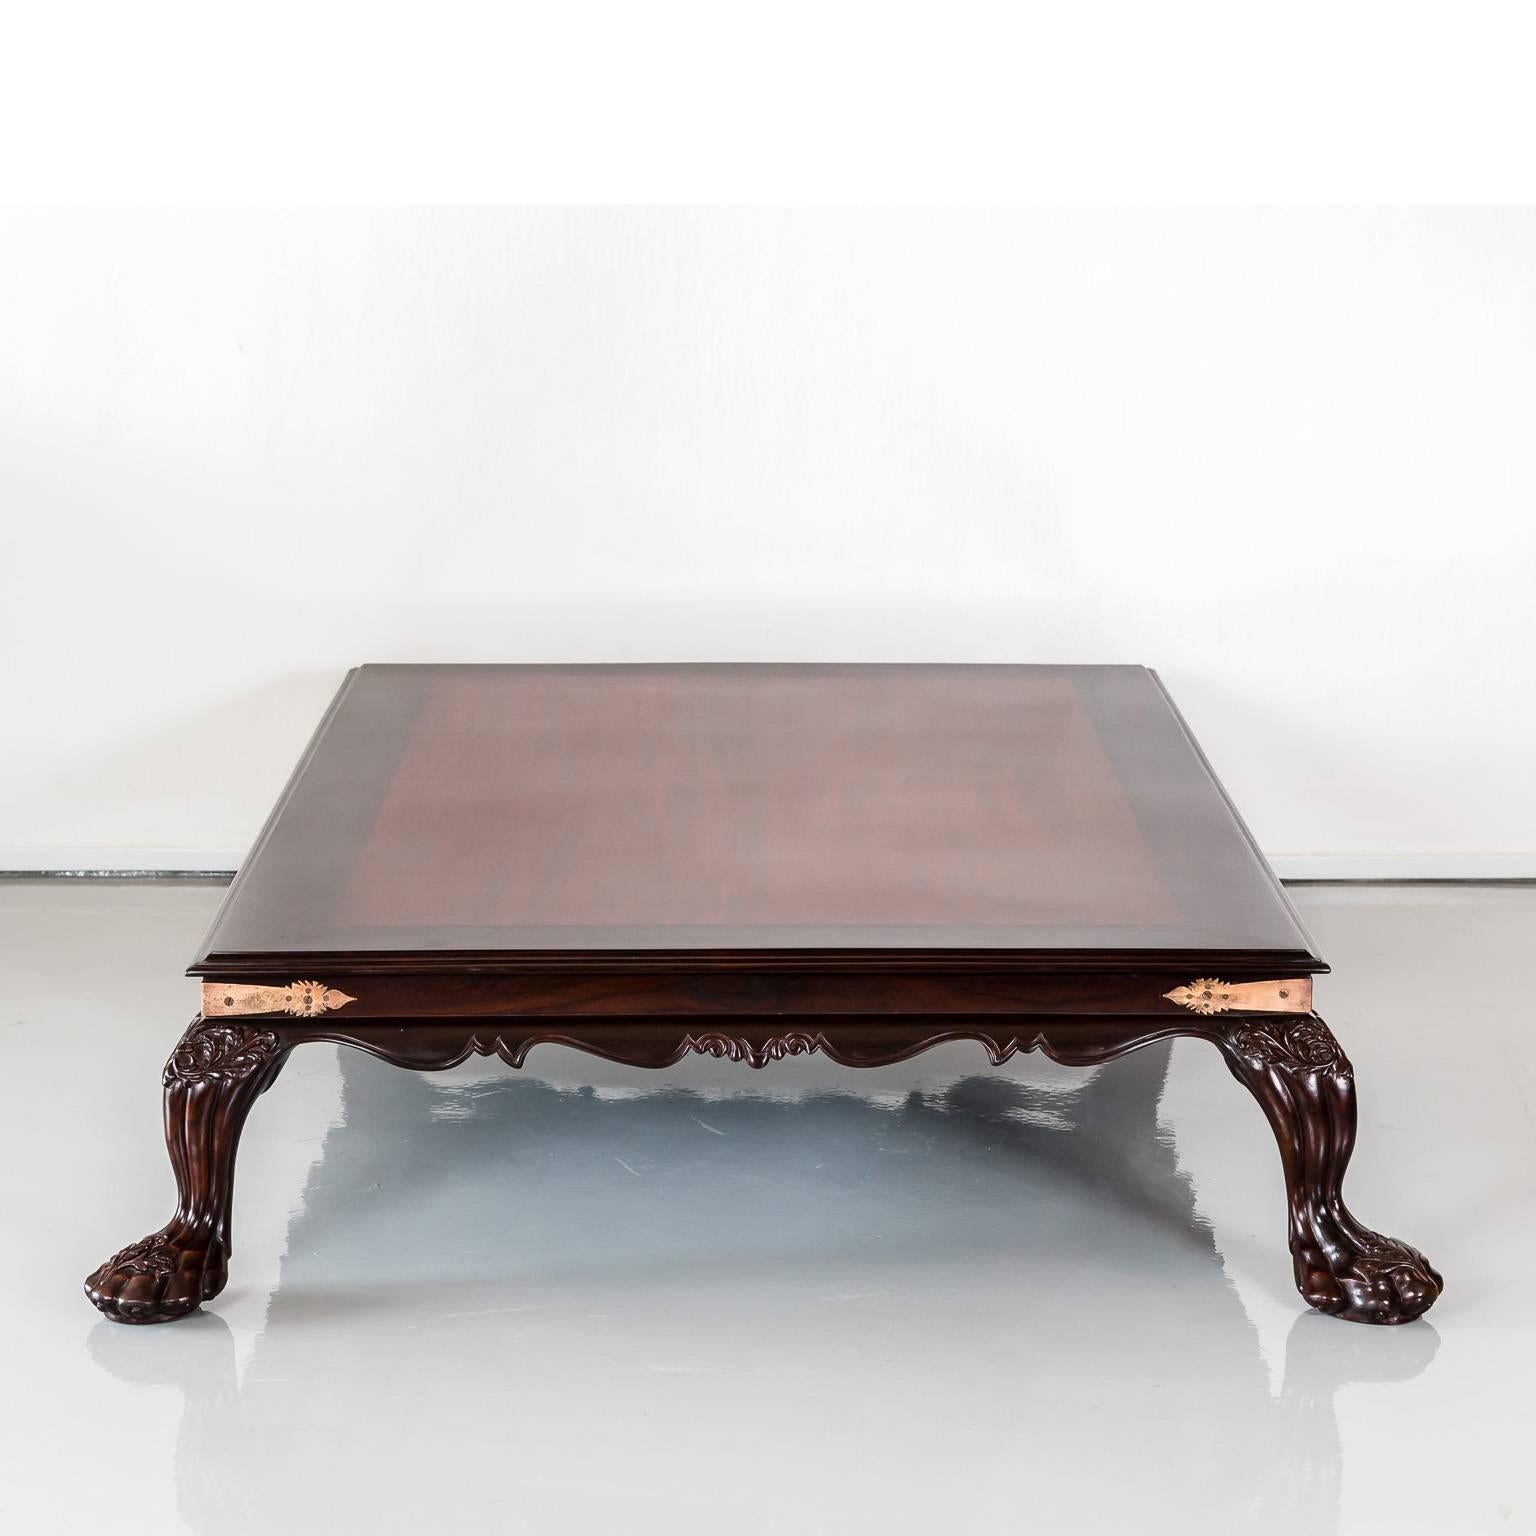 19th Century Antique Anglo-Indian or British Colonial Rosewood Coffee Table with Mahogany Top